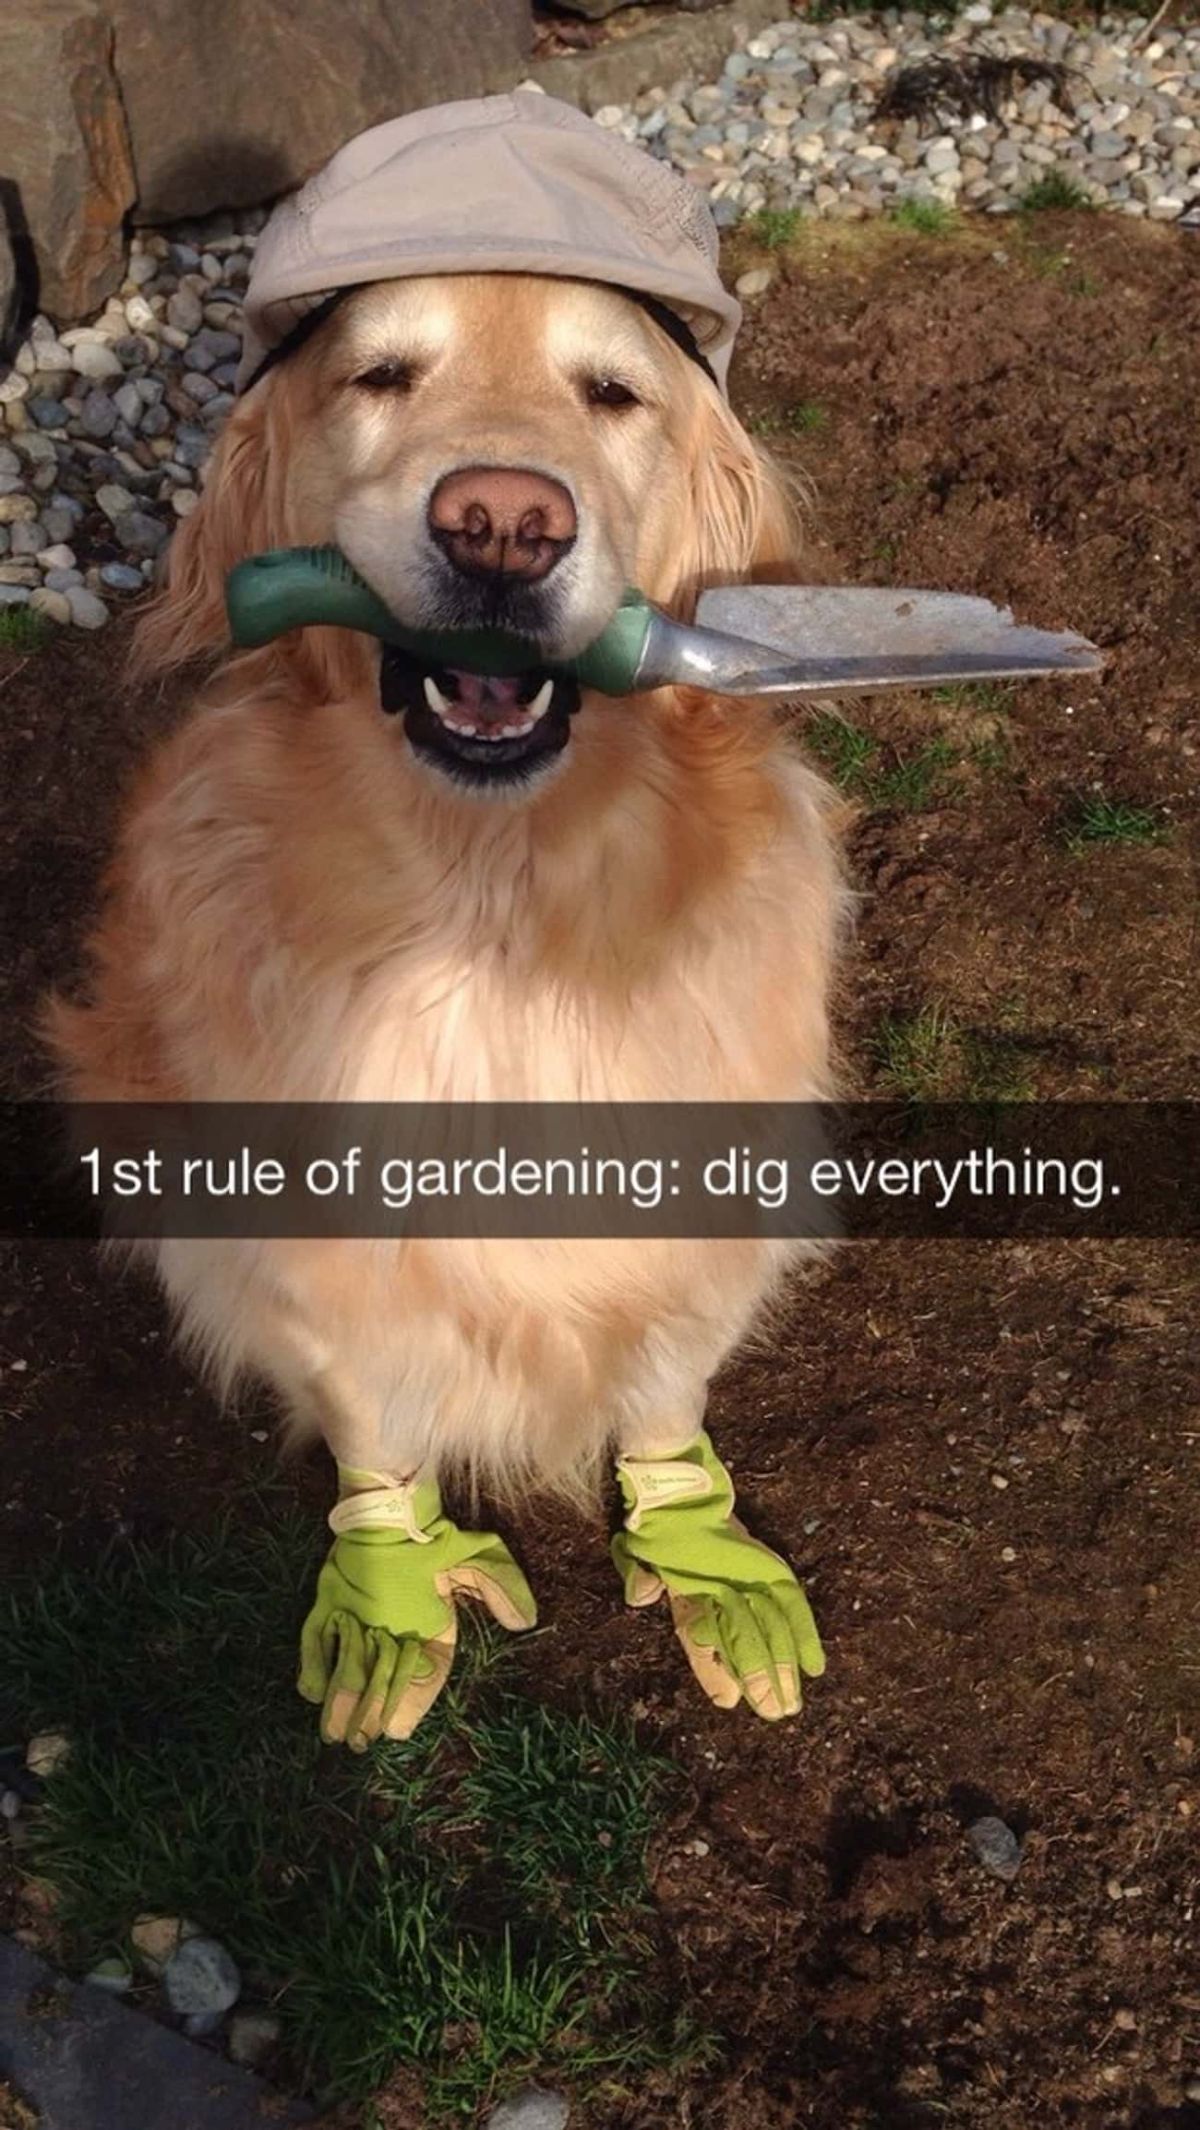 golden retriever sitting with brown hat and green gloves on holding a small green and silver spade with the caption 1st rule of gardening dig everything